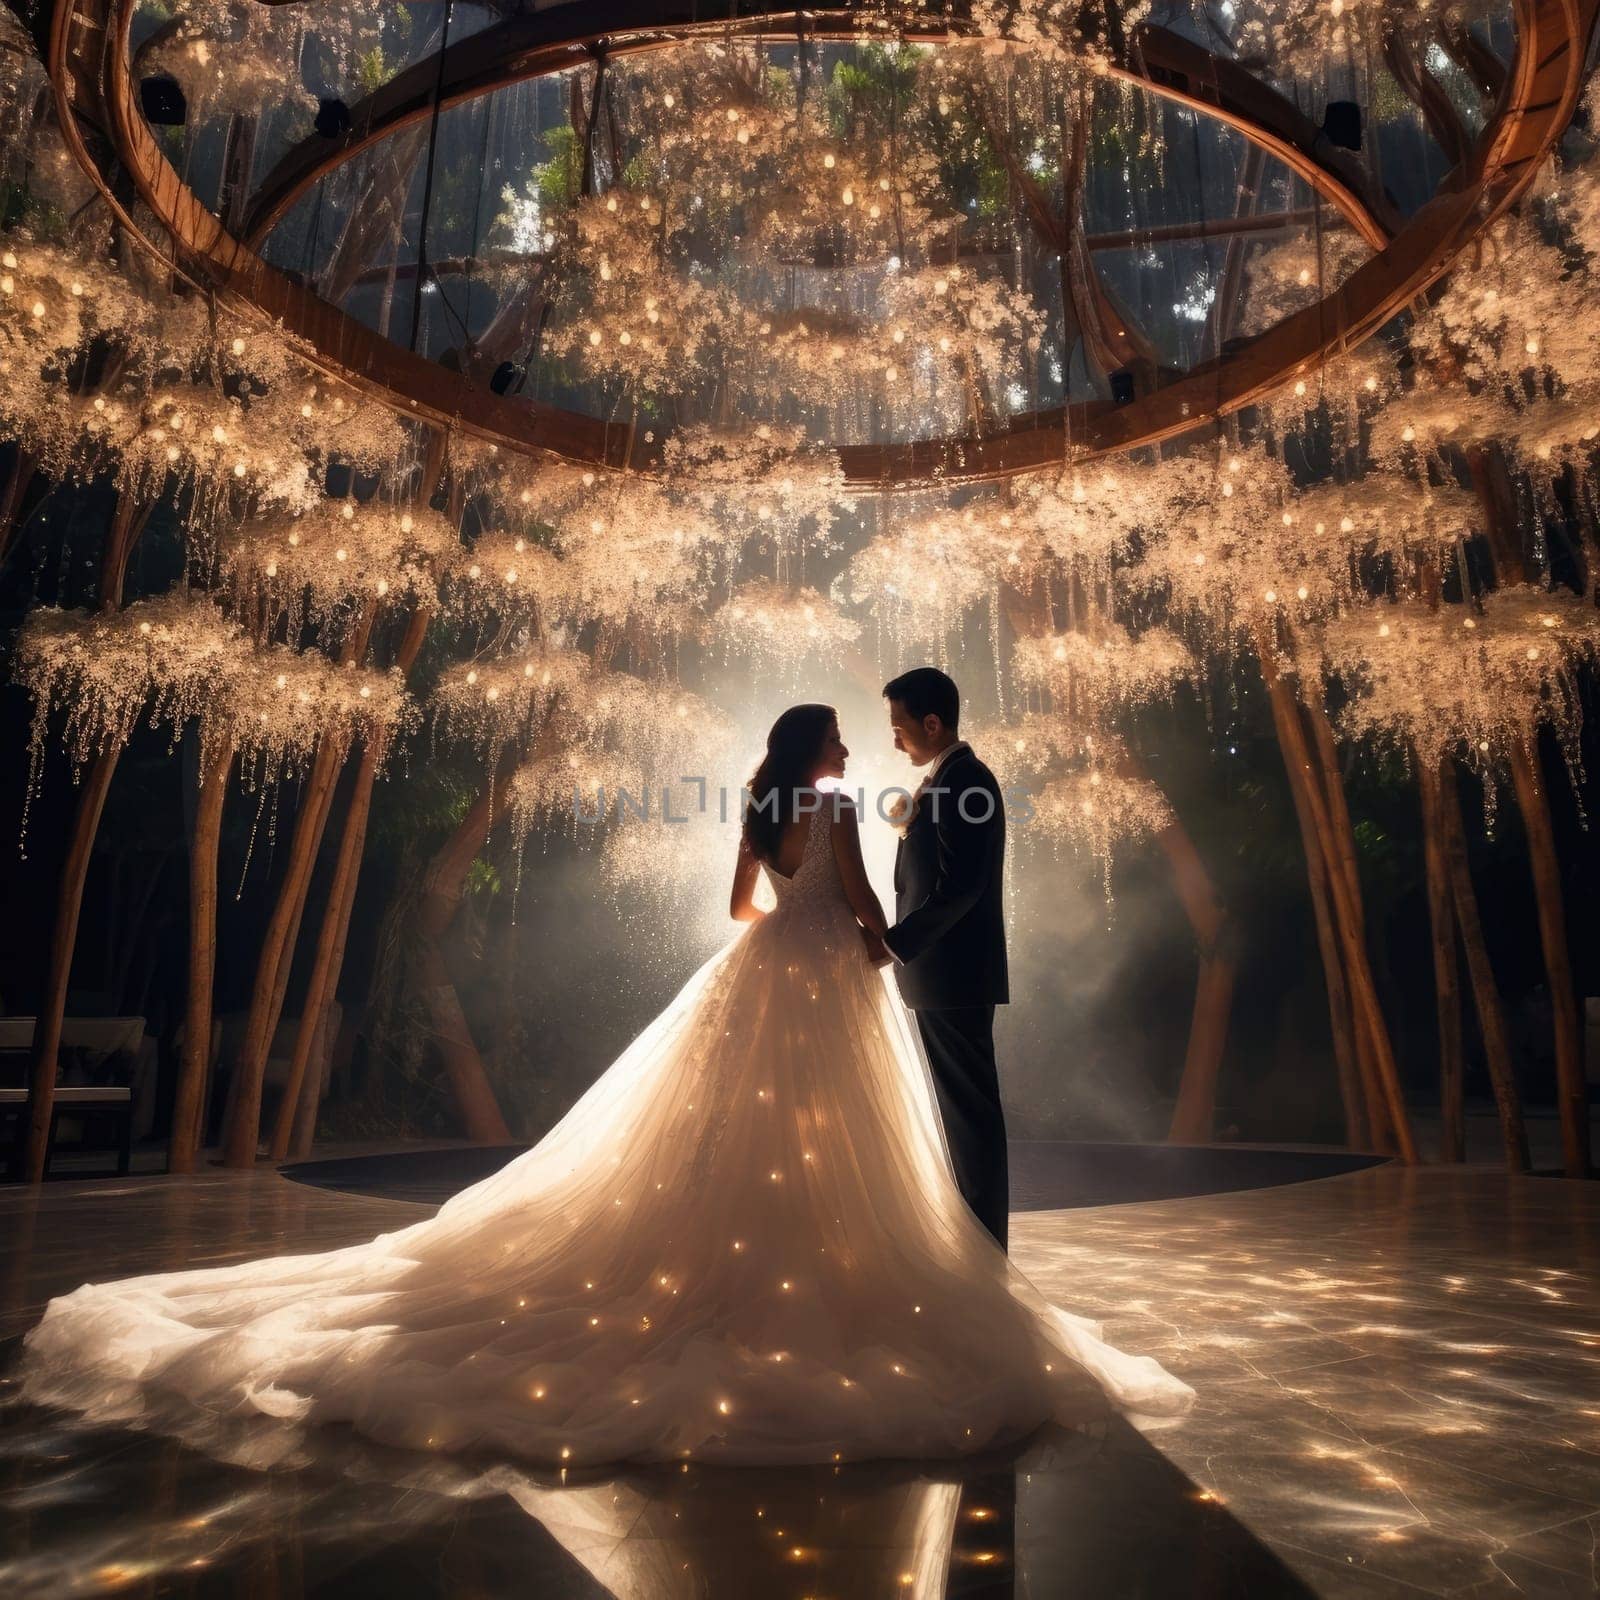 The bride and groom at the perfect wedding by cherezoff